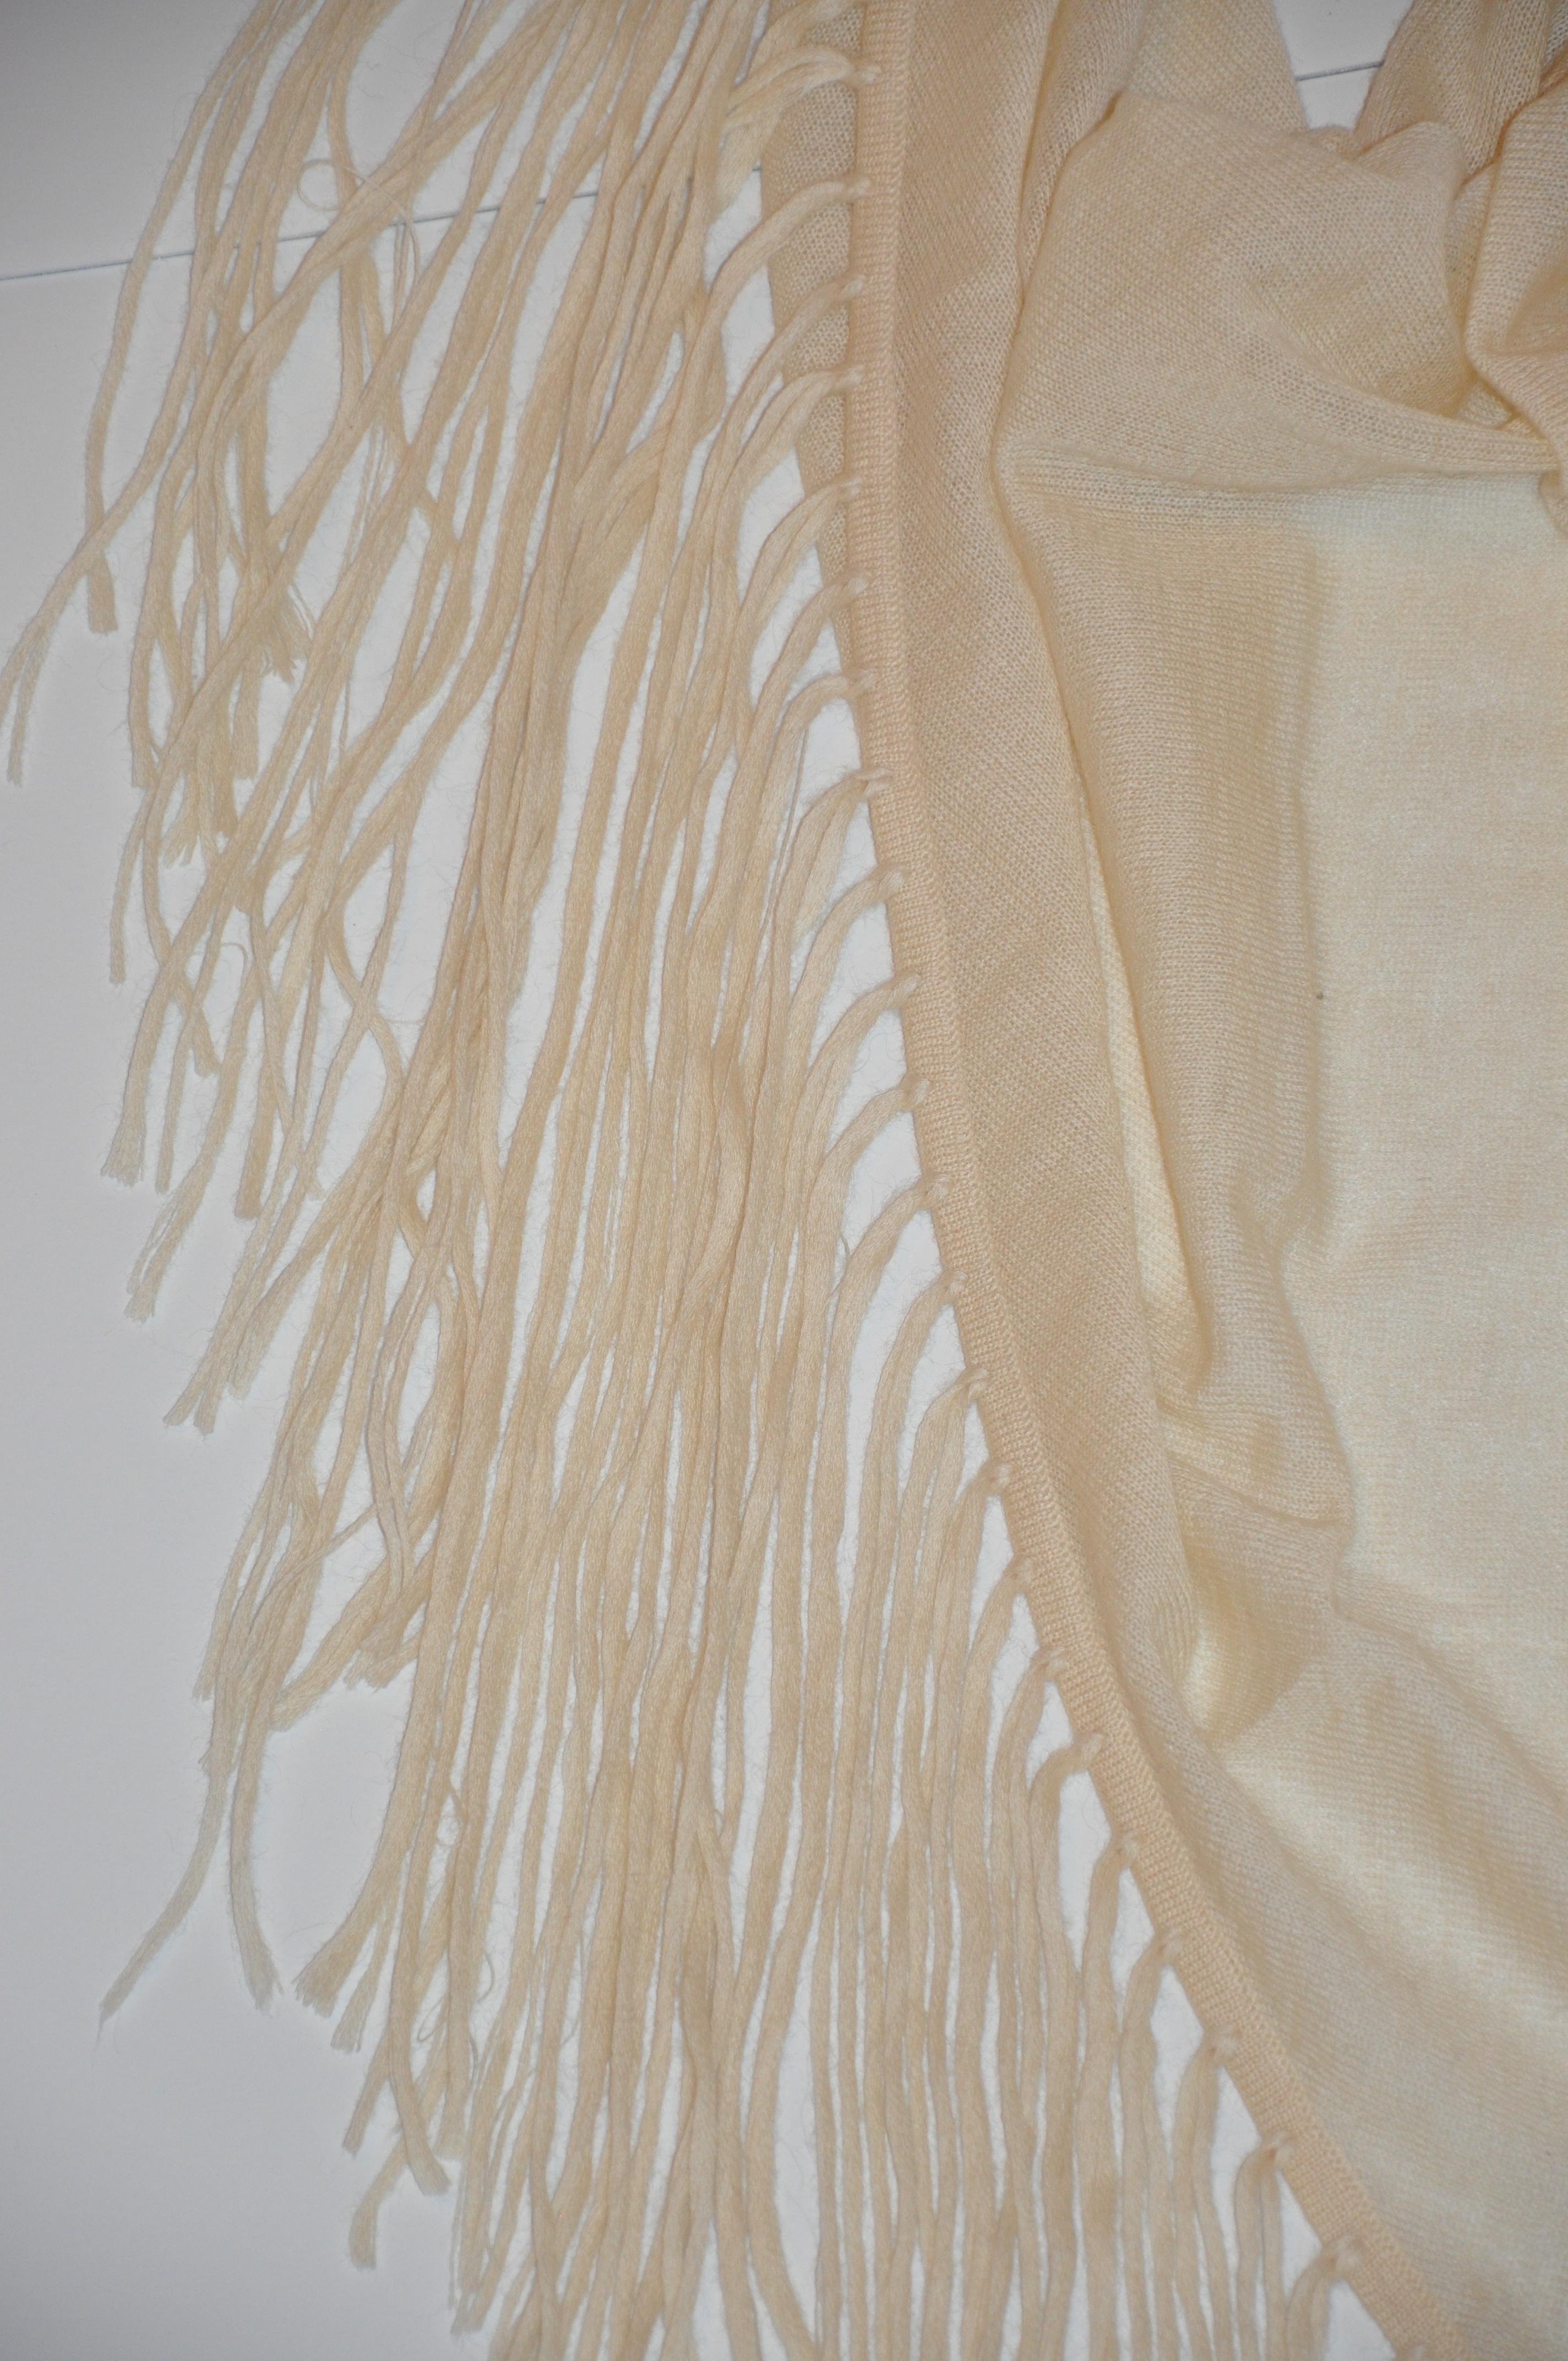        Bottega Veneta wonderful whimsical deconstructed woven cream fringed scarf and optional shawl made of 70% cashmere with 30% mohair blend has multi-size fringes measuring from 5 inches to 16 inches in length. The scarf measures 94 inches by 32